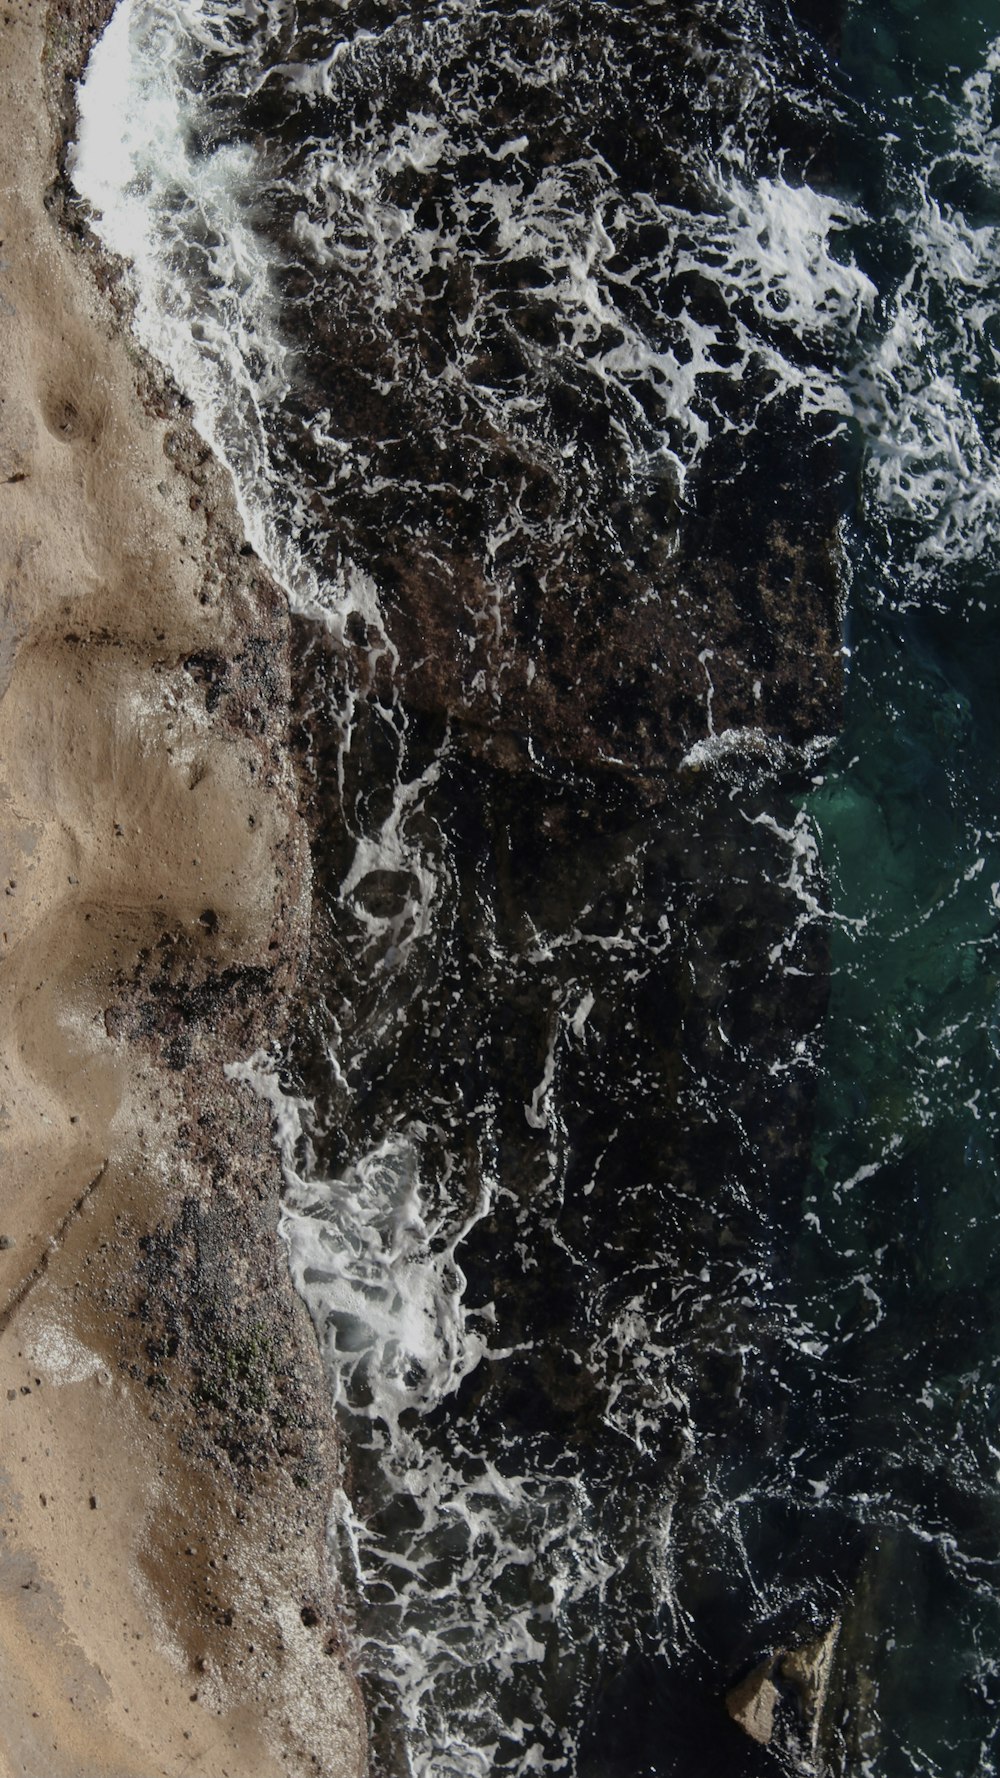 an aerial view of a beach with waves crashing on the shore